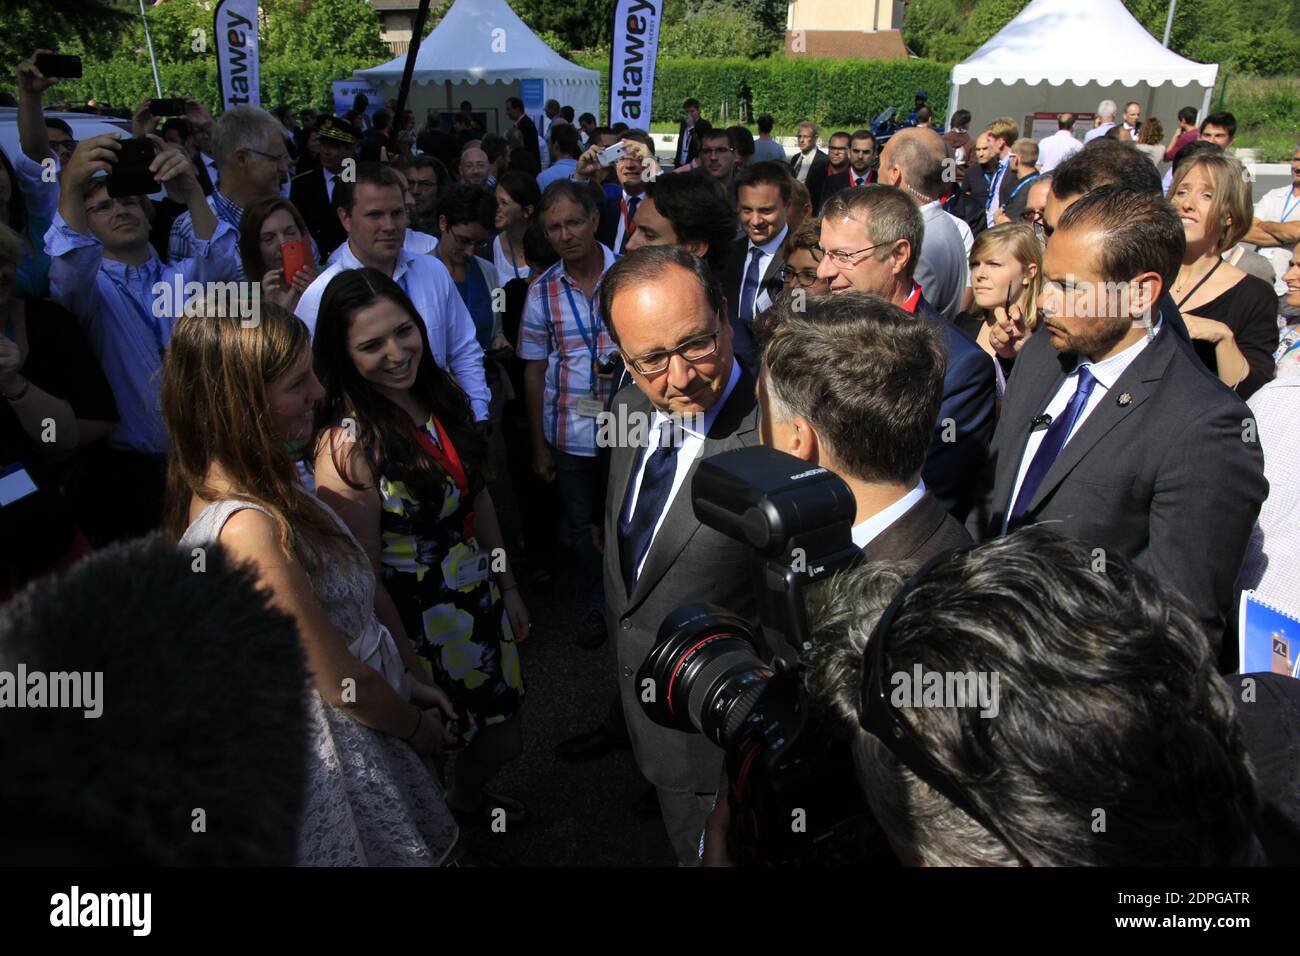 French President Francois Hollande along with Minister of Ecology, Sustainable Development and Energy Segolene Royal and Secretary of State for Regional Reform Andre Vallini during a visit to the company Air Liquide Advanced Technologies, a world leader in gases, technologies and services for industry and health, in Sassenage, near Grenoble, eastern France on August 20, 2015. Photo by Xavier Vila/Pool/ABACAPRESS.COM Stock Photo